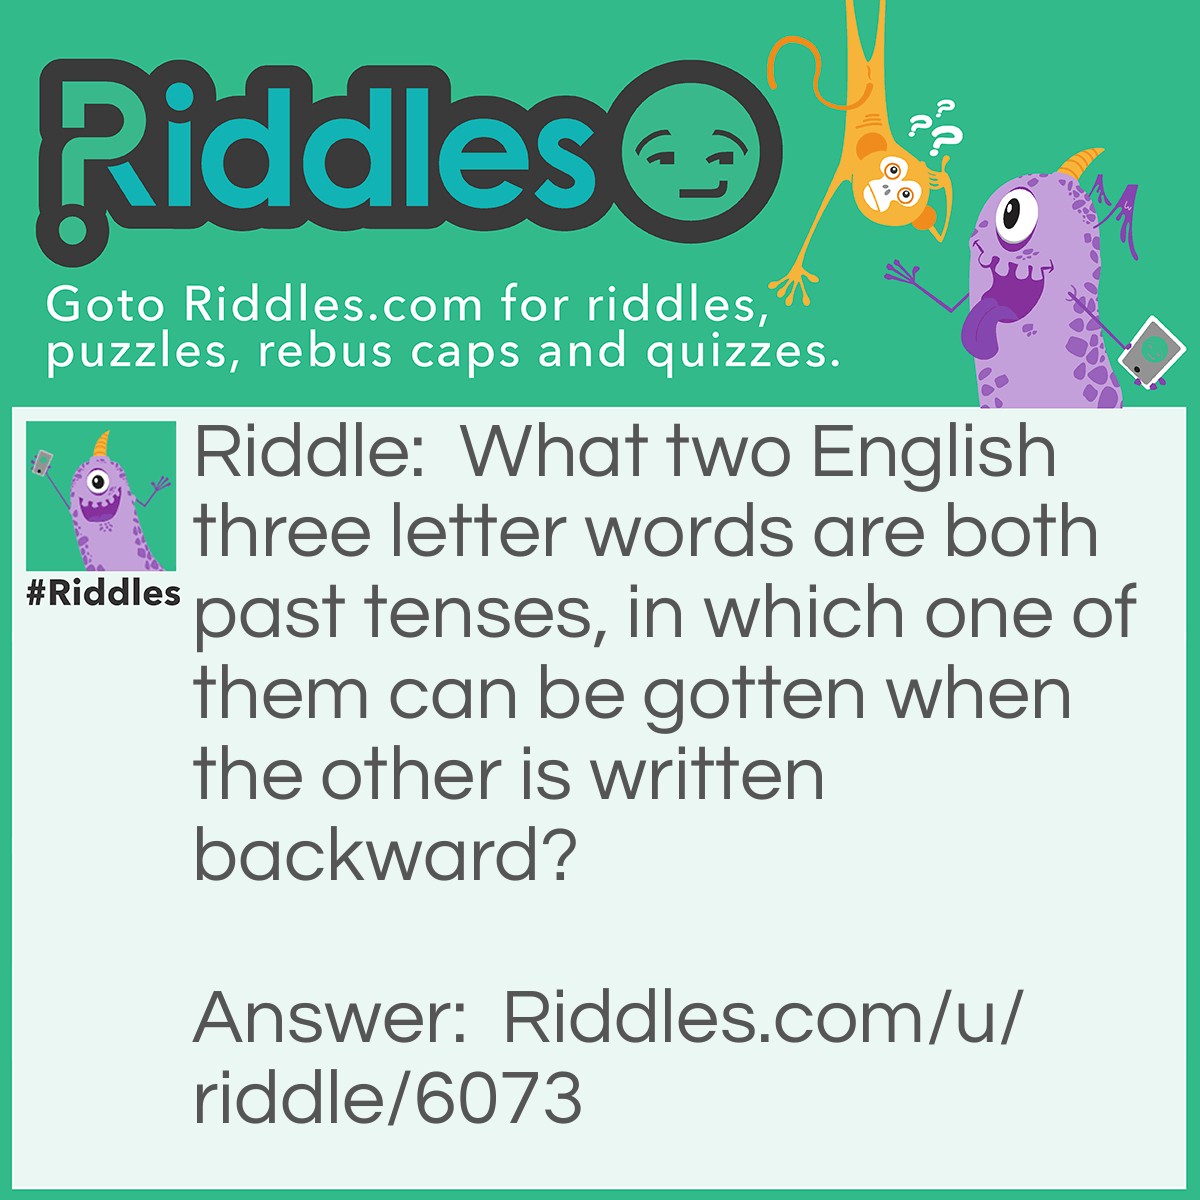 Riddle: What two English three letter words are both past tenses, in which one of them can be gotten when the other is written backward? Answer: Was and Saw.